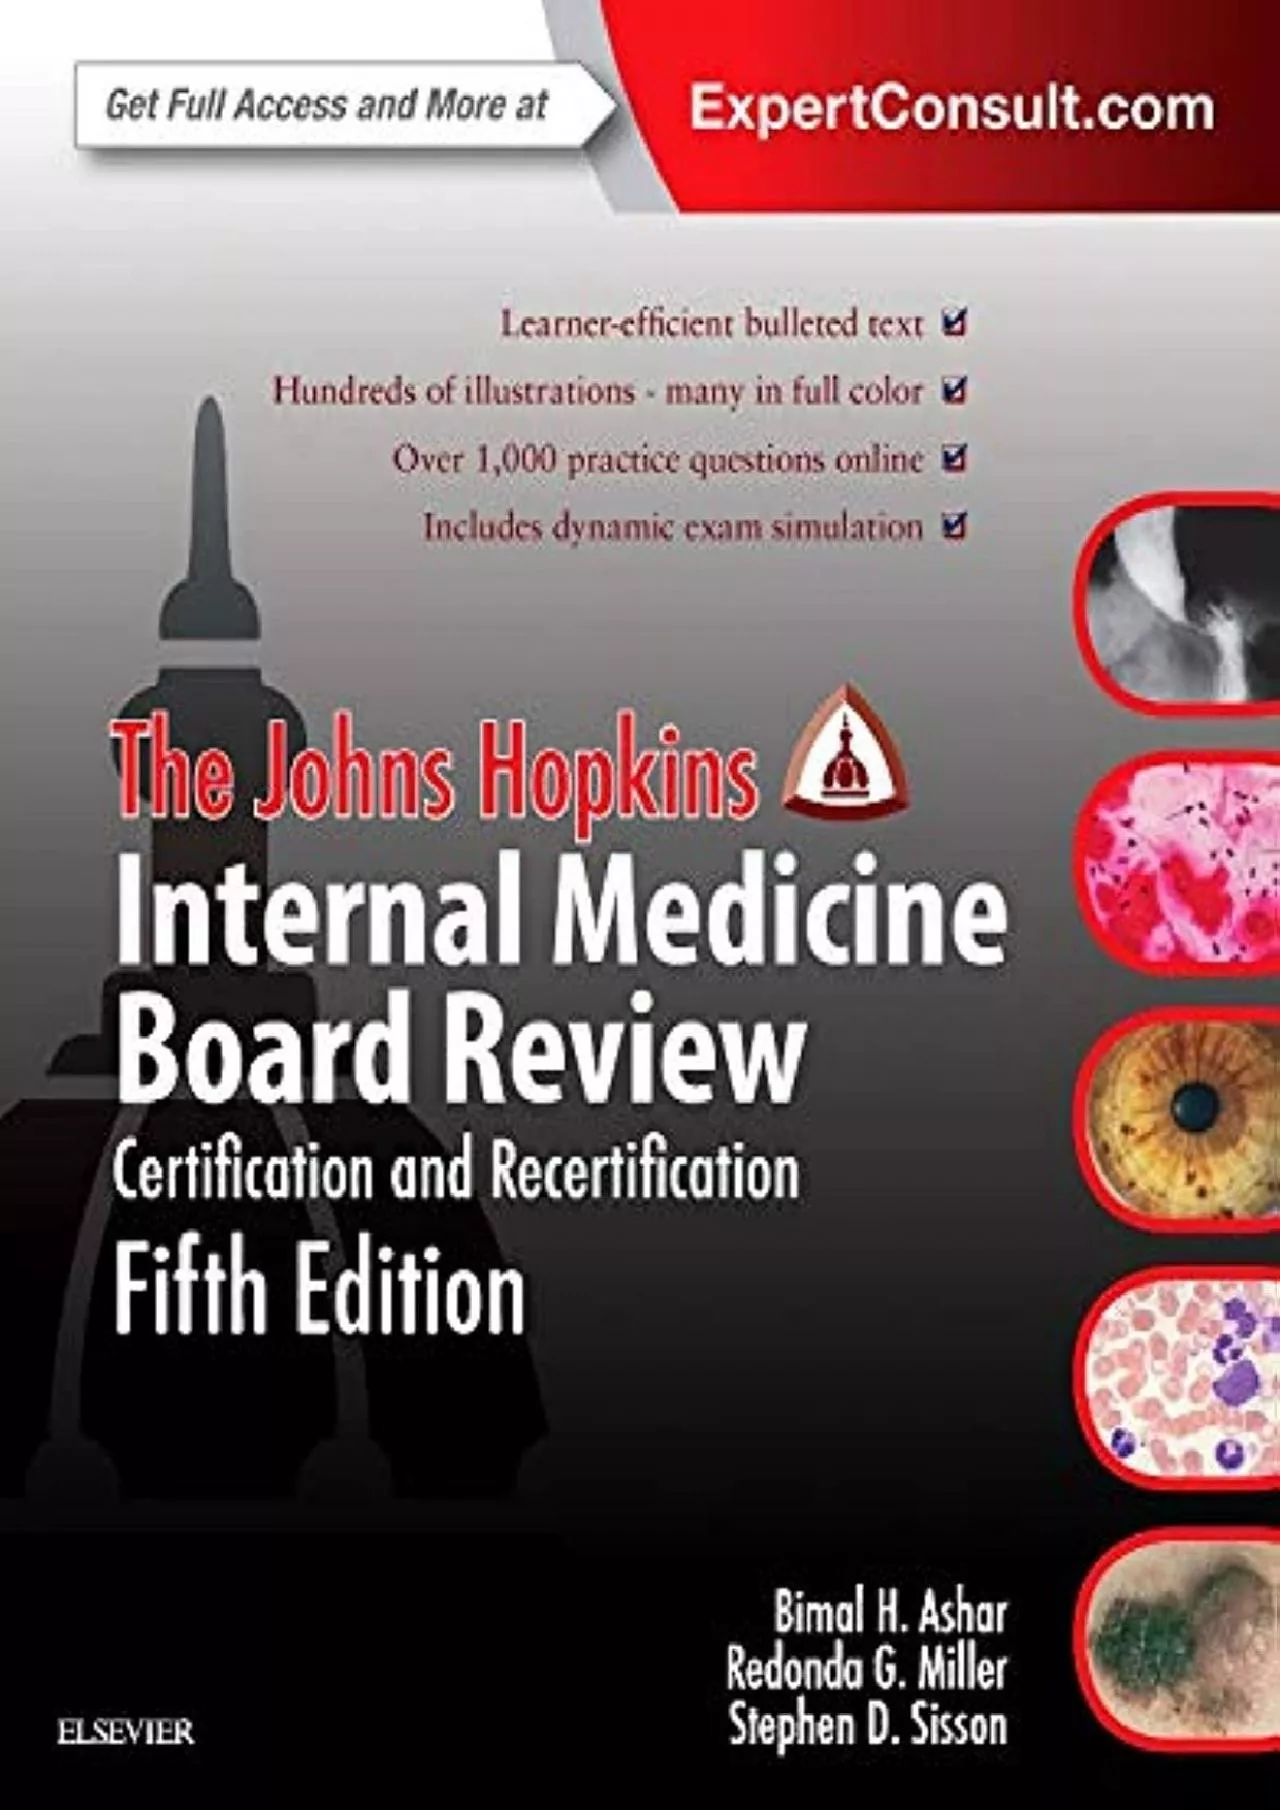 [EBOOK] The Johns Hopkins Internal Medicine Board Review: Certification and Recertification